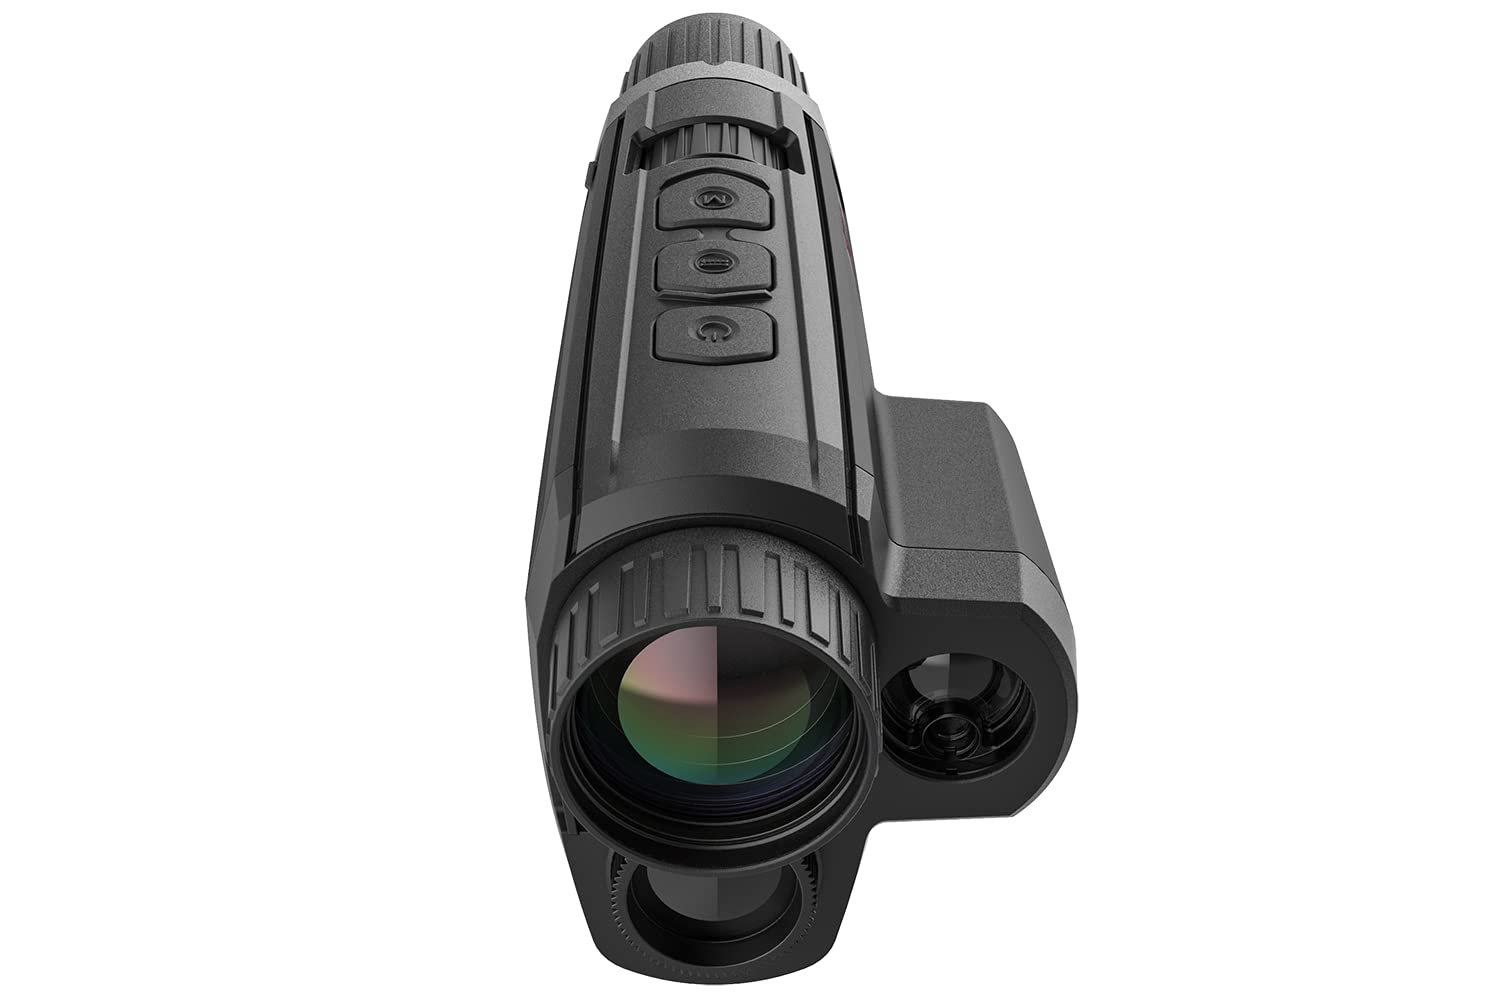 AGM Global Vision Fuzion LRF TM35-640 Thermal Monocular with Laser Rangefinder and Bi-Spectrum Image Fusion Hunting Monocular with Thermal Imaging Heat Vision Perfect for Hunting and Outdoor Adventure